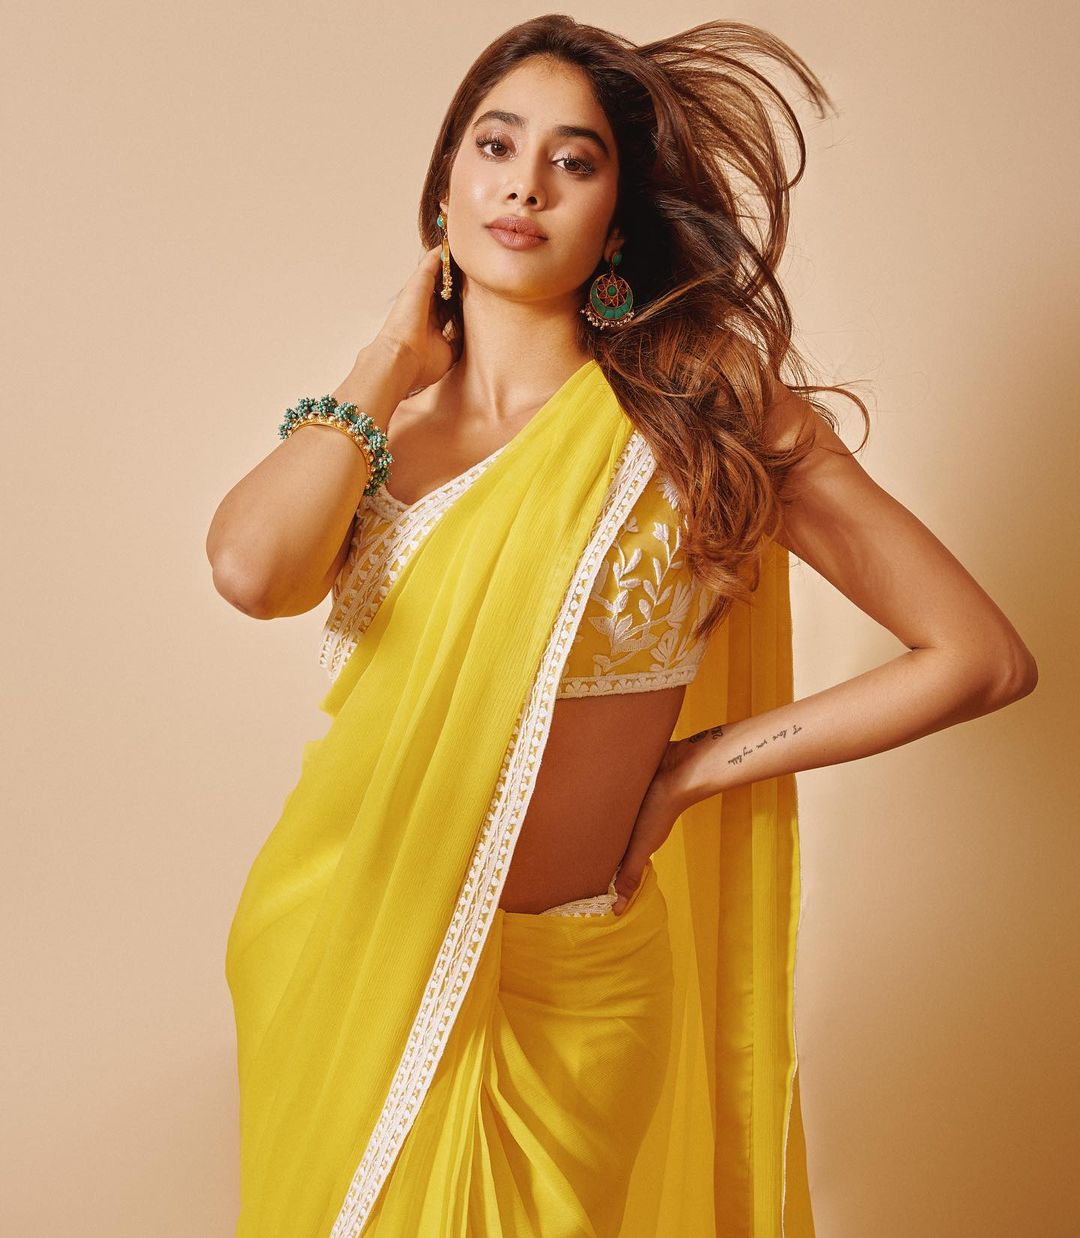 Janhvi Kapoor strikes a seductive pose with her open tresses